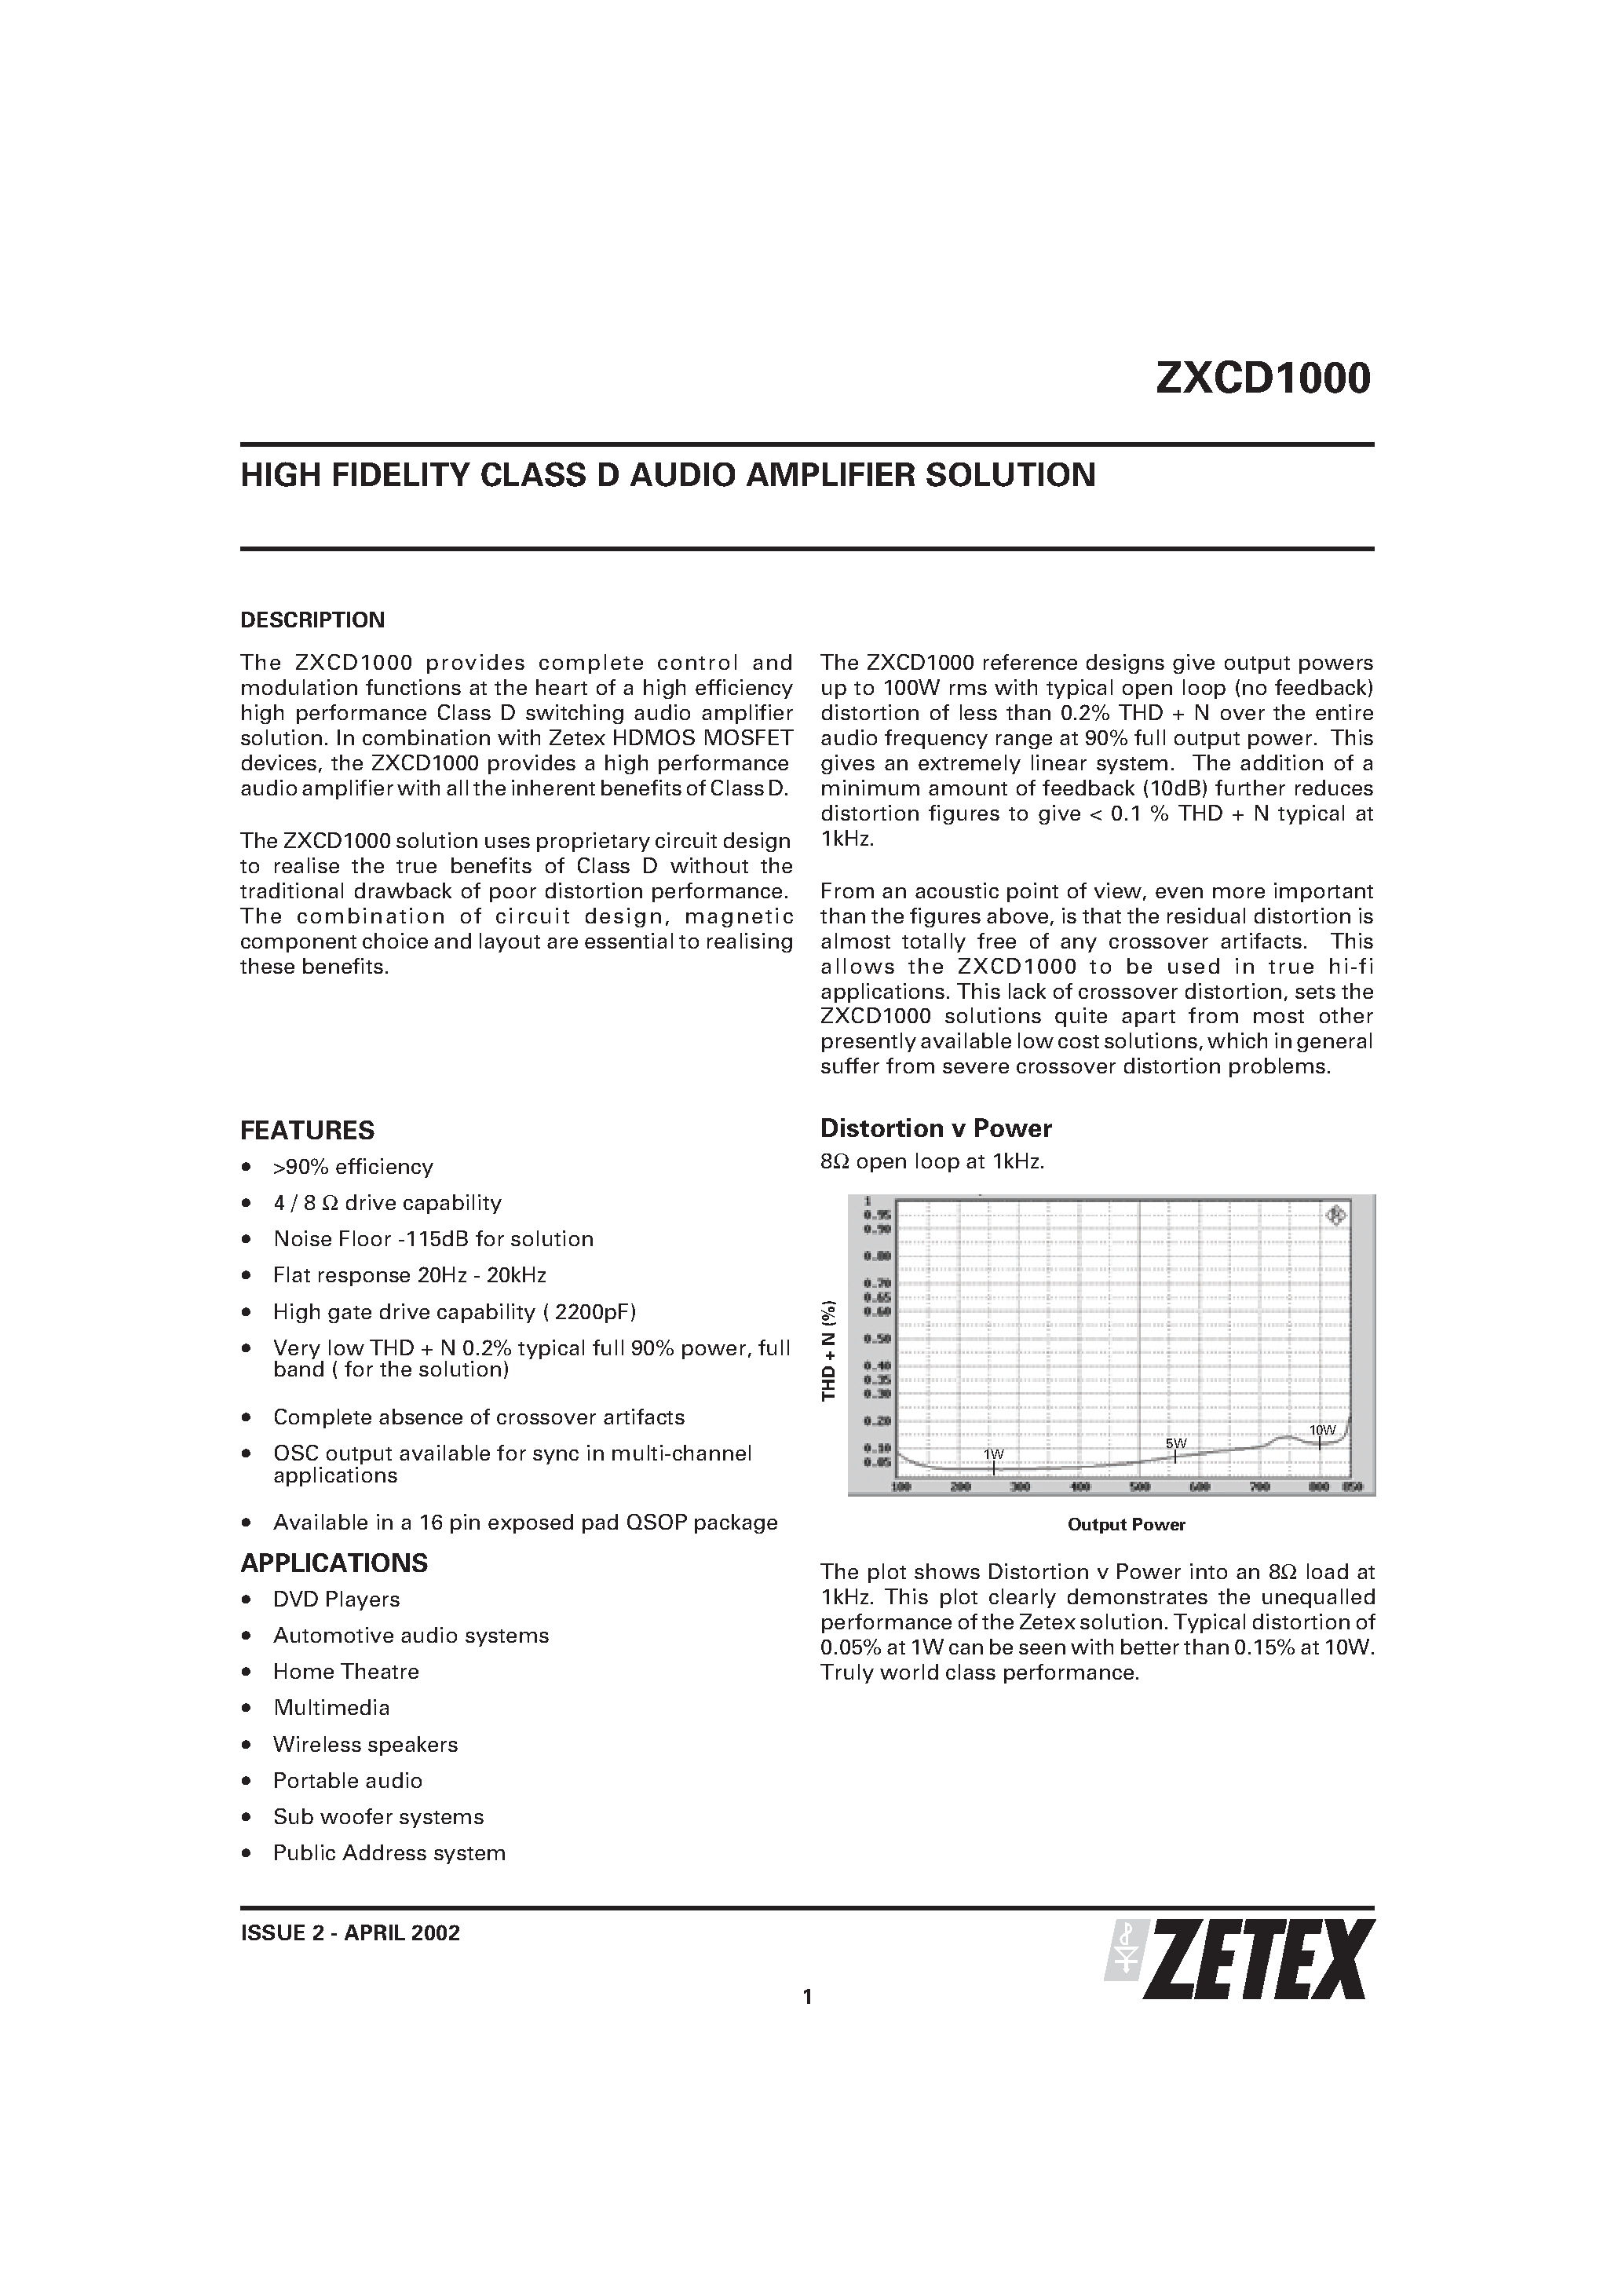 Datasheet ZXCD1000 - HIGH FIDELITY CLASS D AUDIO AMPLIFIER SOLUTION page 1